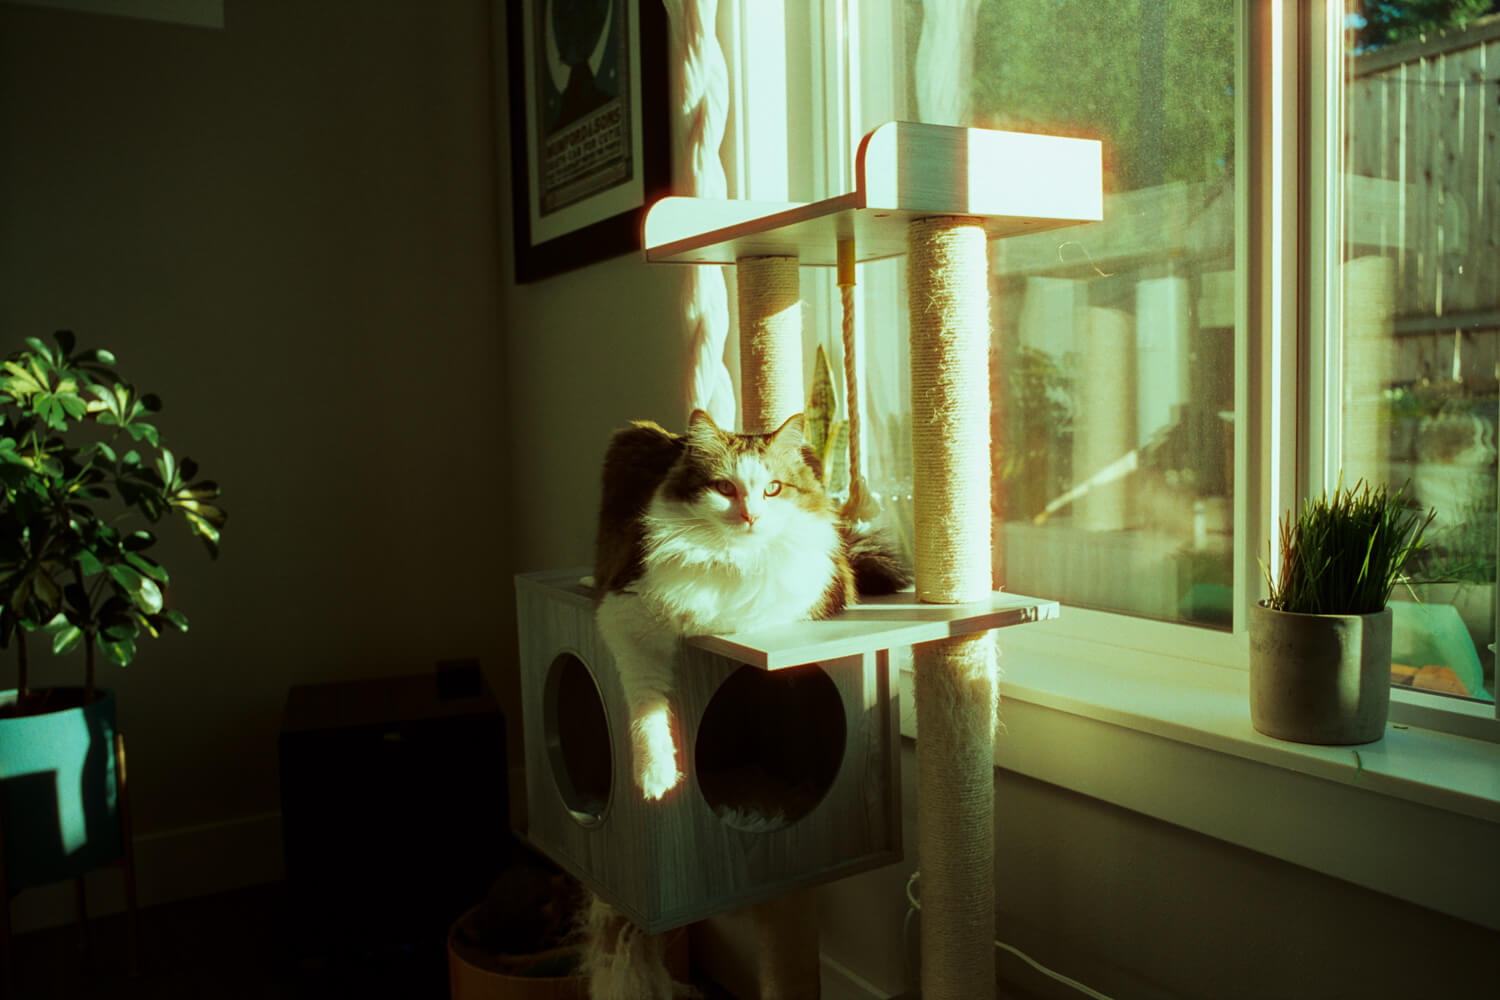 CineStill 400D - Hexar RF - Hexar RF - Not sure what happened - Obligatory cat photo to try to finish the roll, this one ended up pretty all over the place with the harsh window light coming through.
